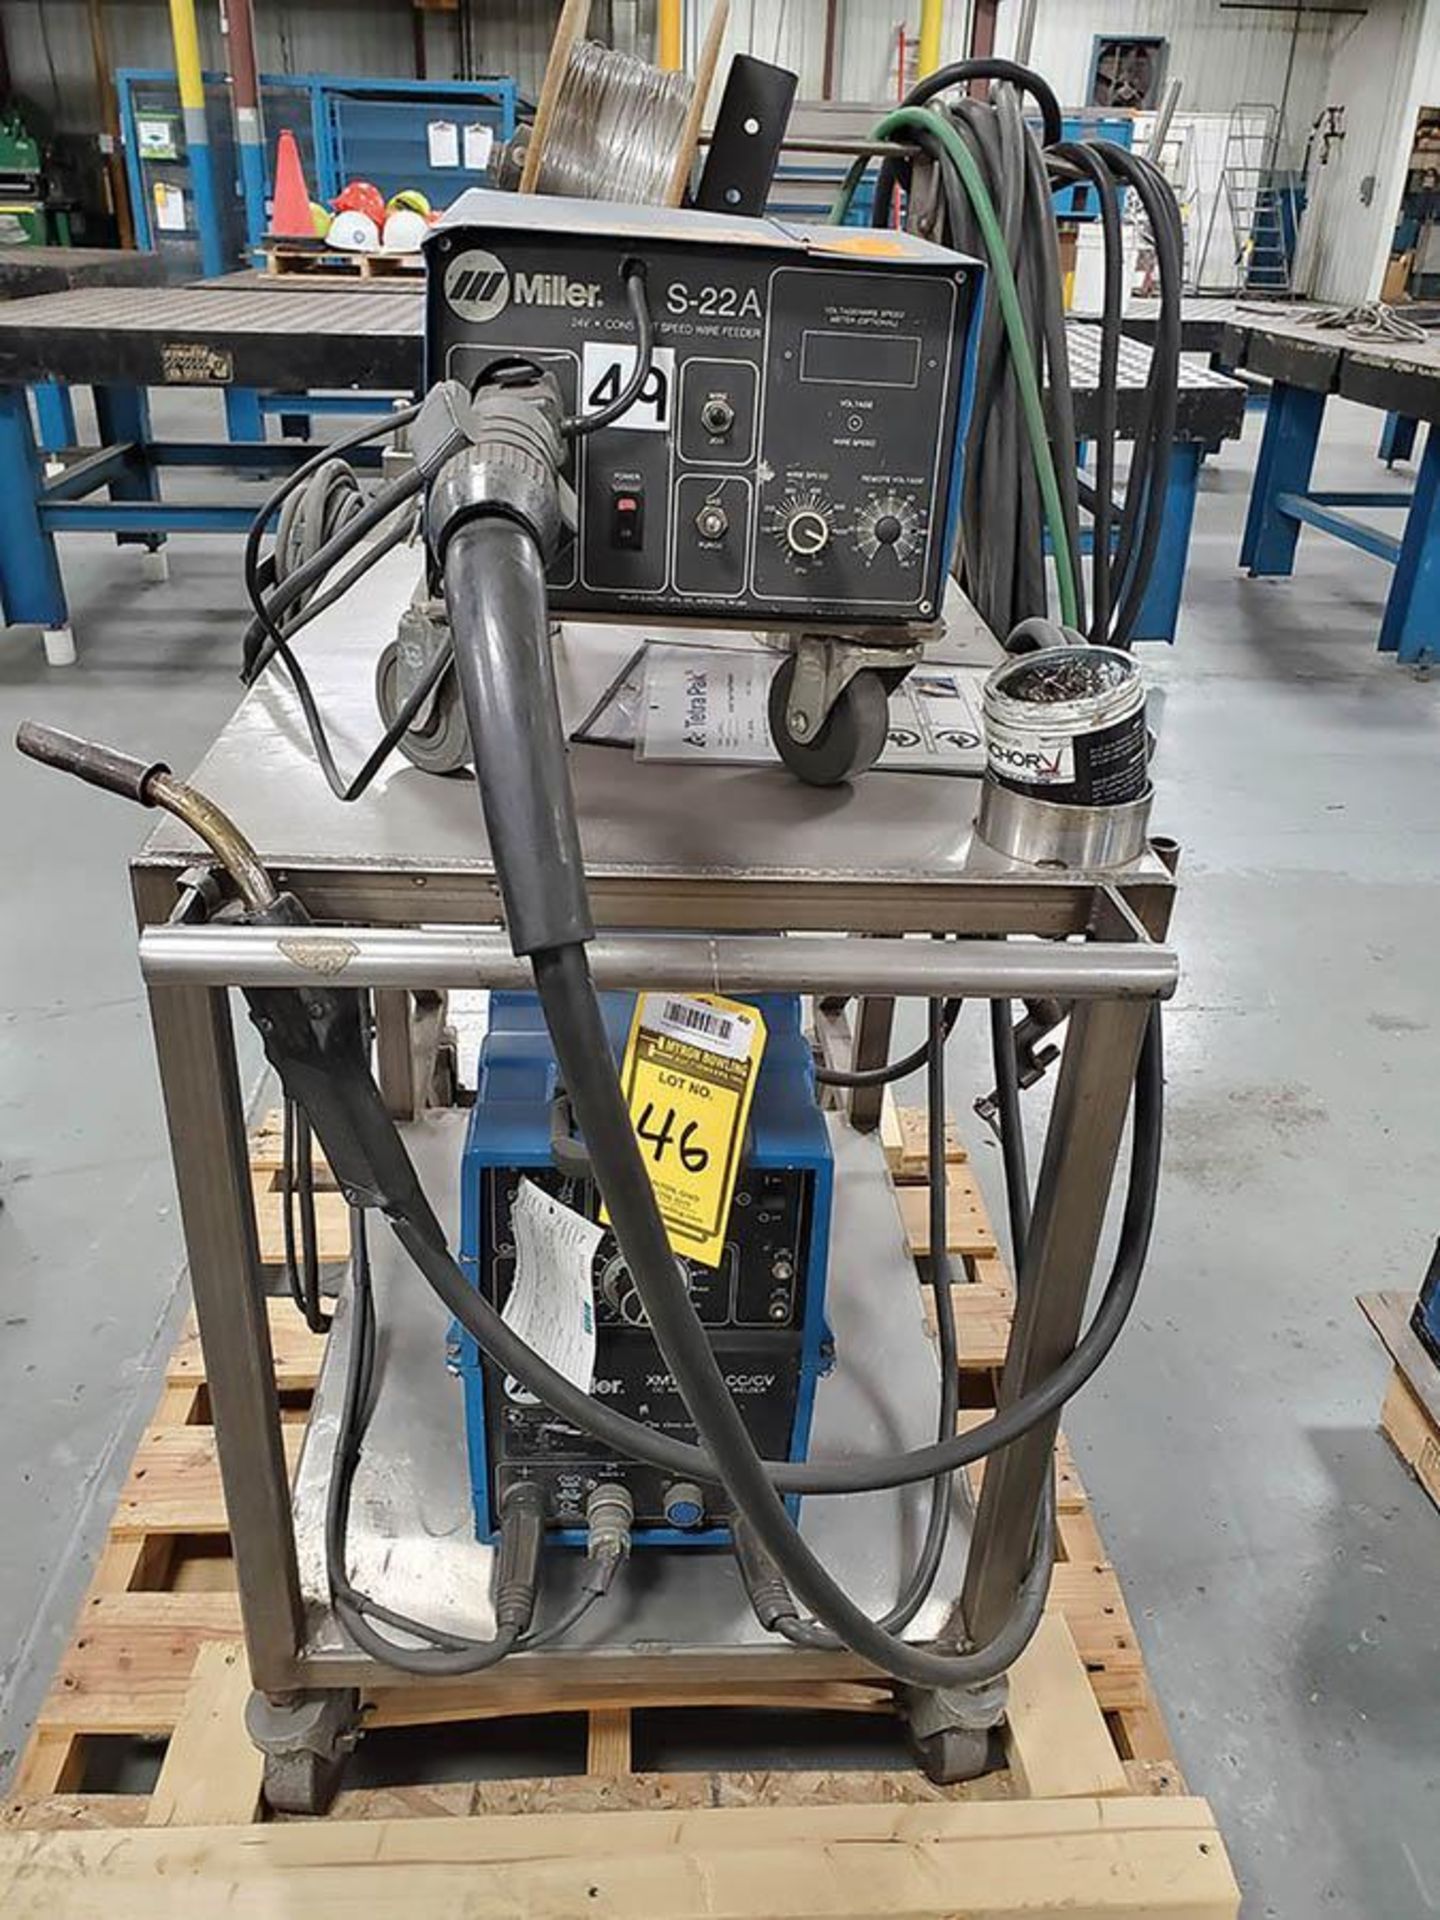 MILLER XMT 300 CC/CV DC INVERTER ARC WELDER ON STAINLESS CART WITH MILLER S-22A 24V CONSTANT WIRE - Image 2 of 5